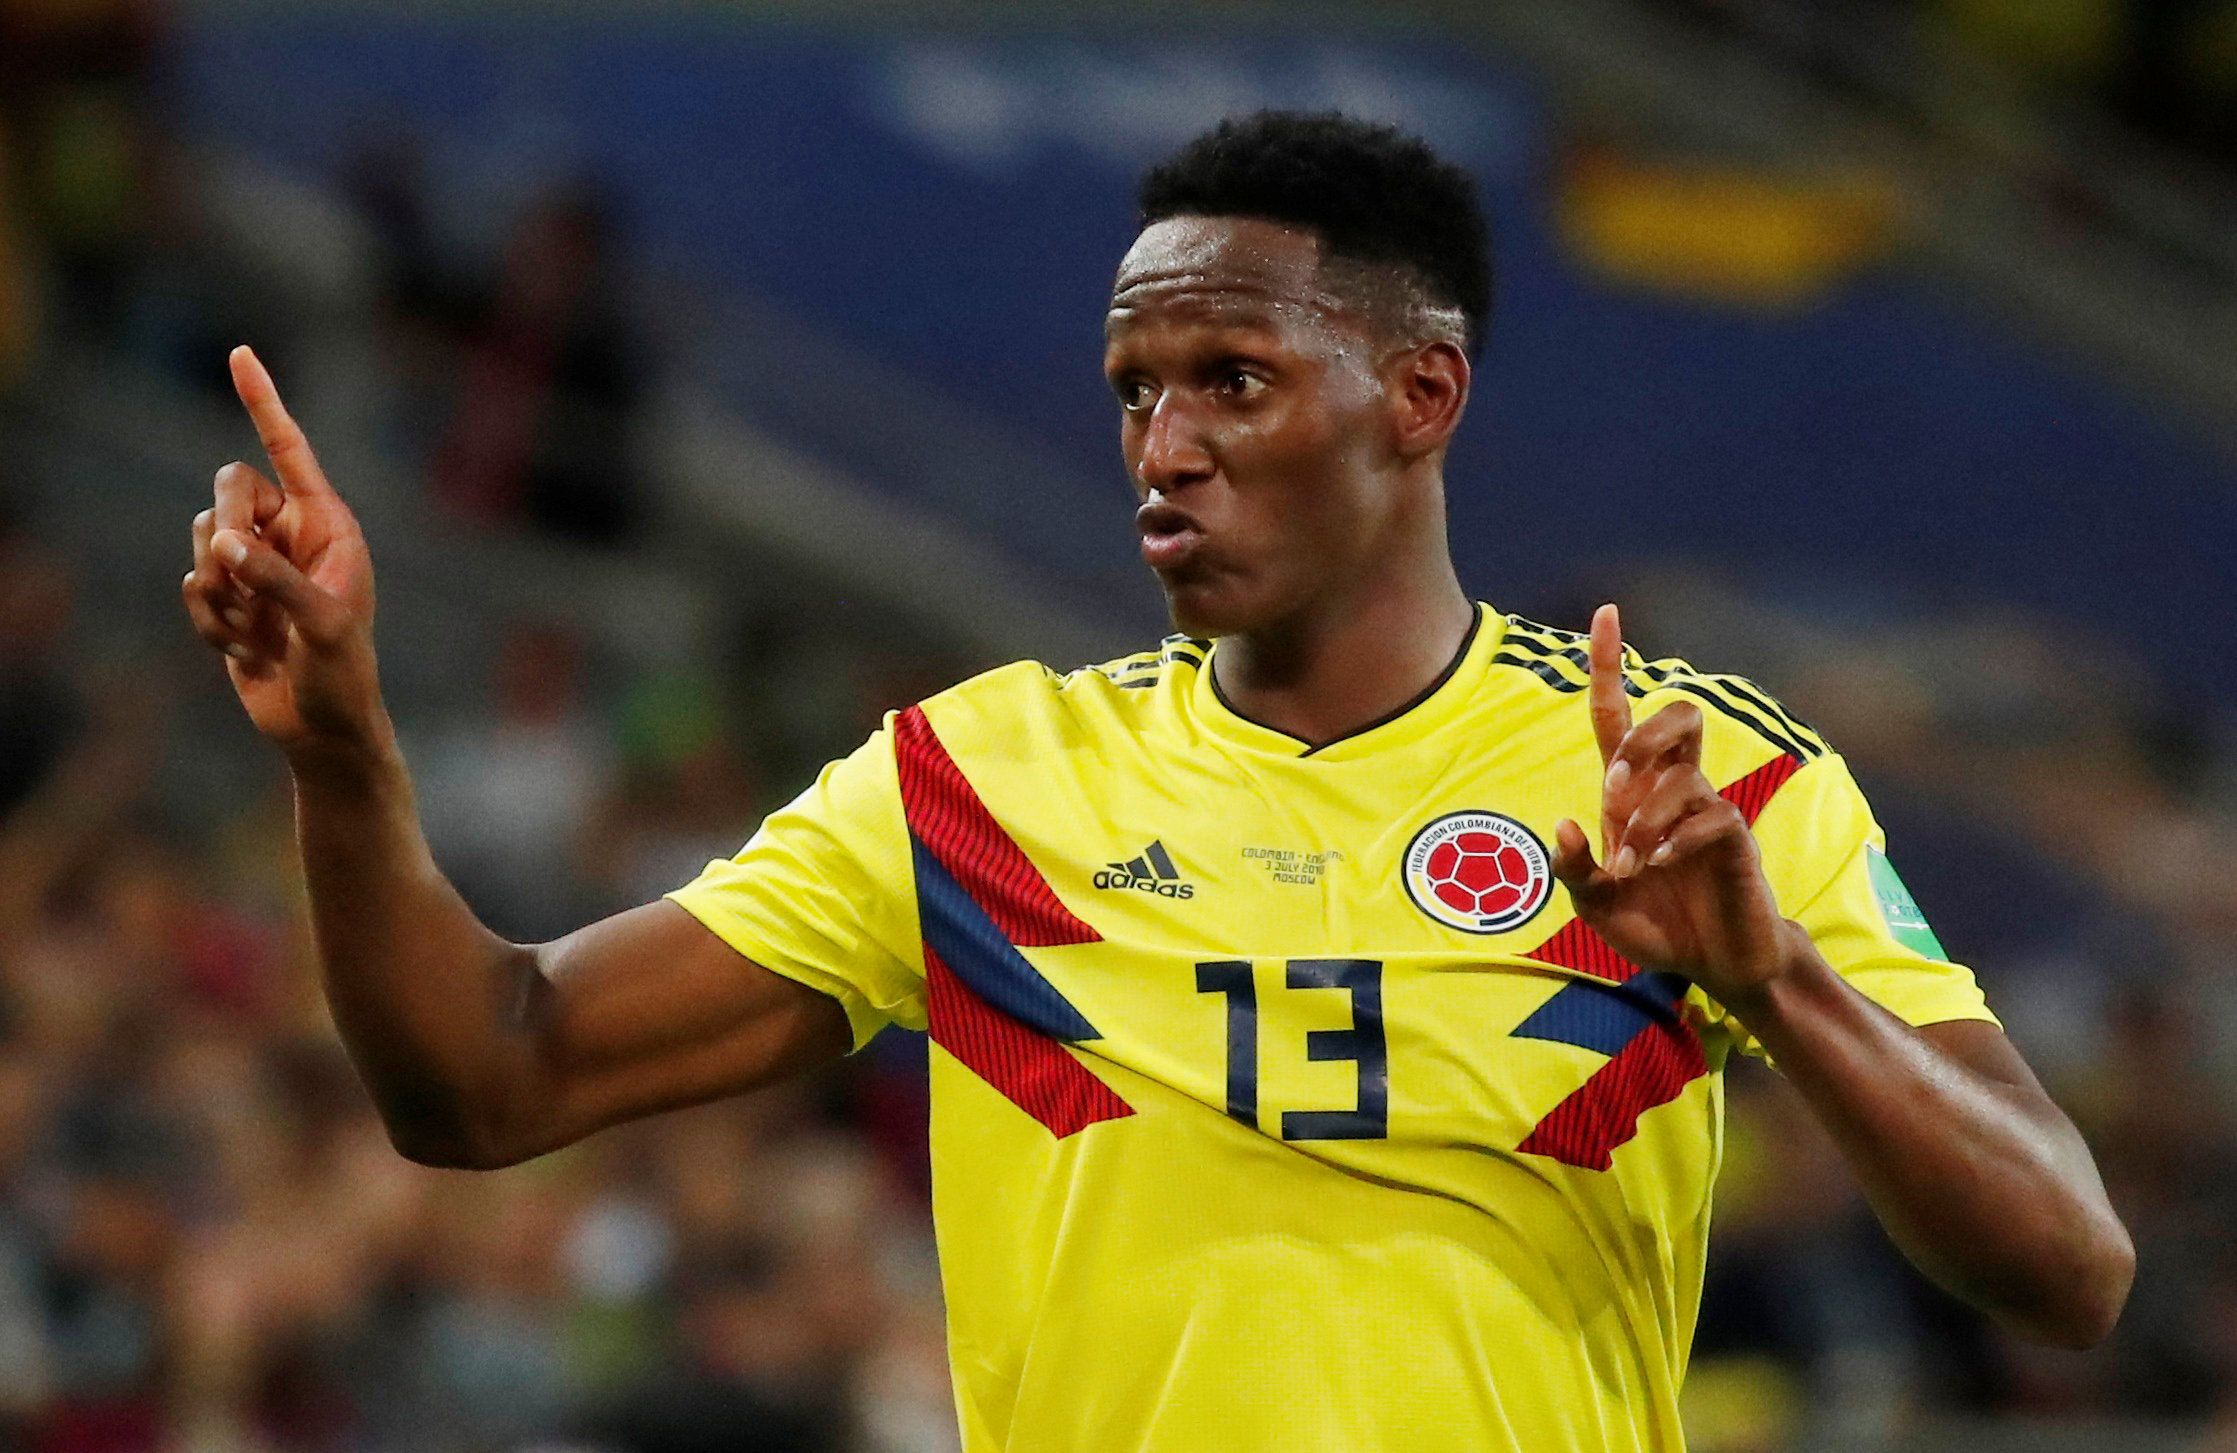 Soccer Football - World Cup - Round of 16 - Colombia vs England - Spartak Stadium, Moscow, Russia - July 3, 2018  Colombia's Yerry Mina celebrates  REUTERS/Maxim Shemetov